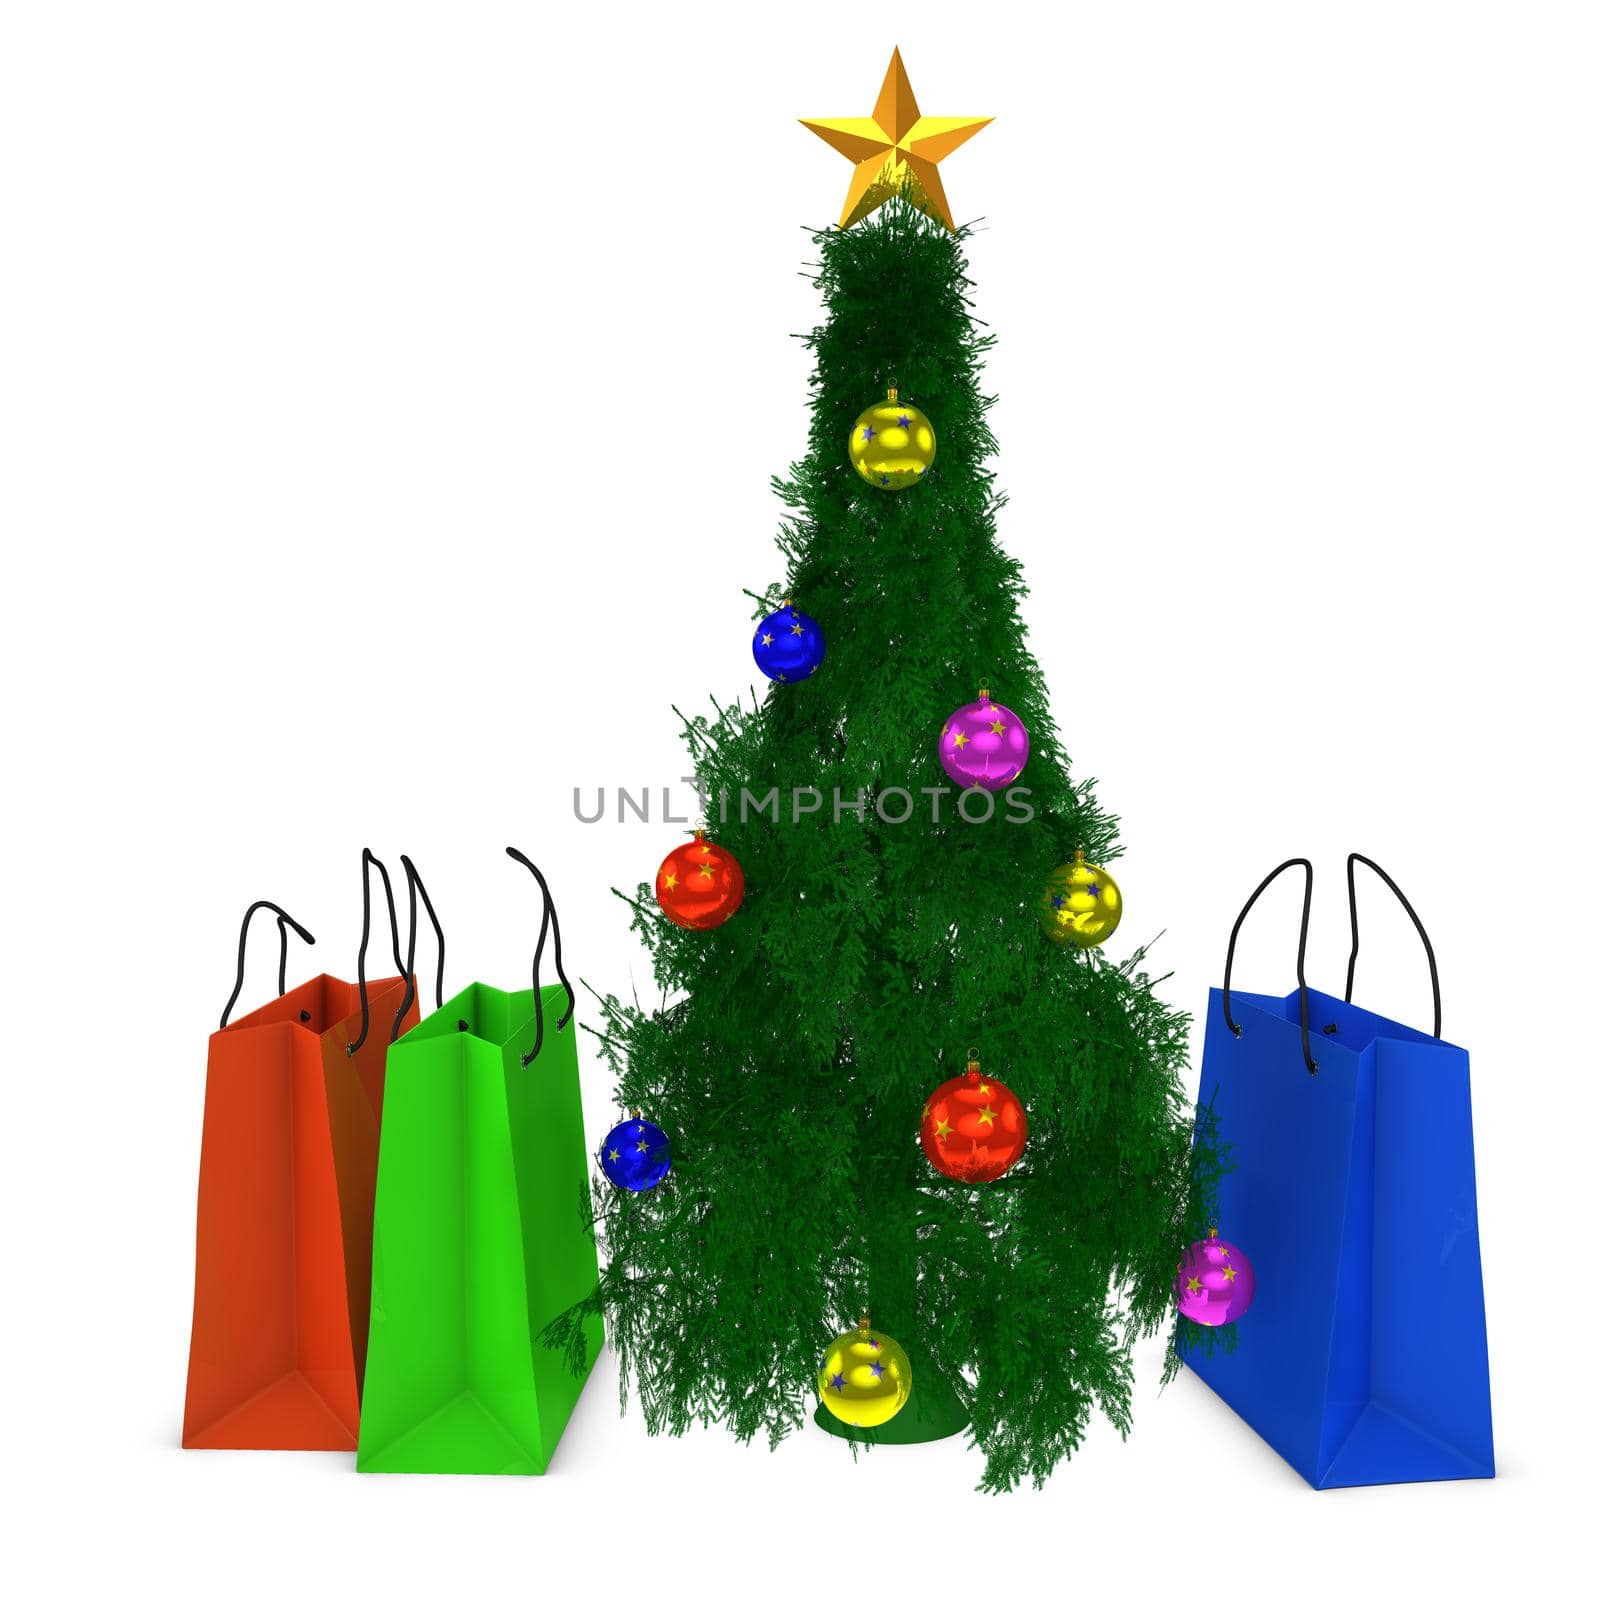 bags for shopping near a Christmas tree